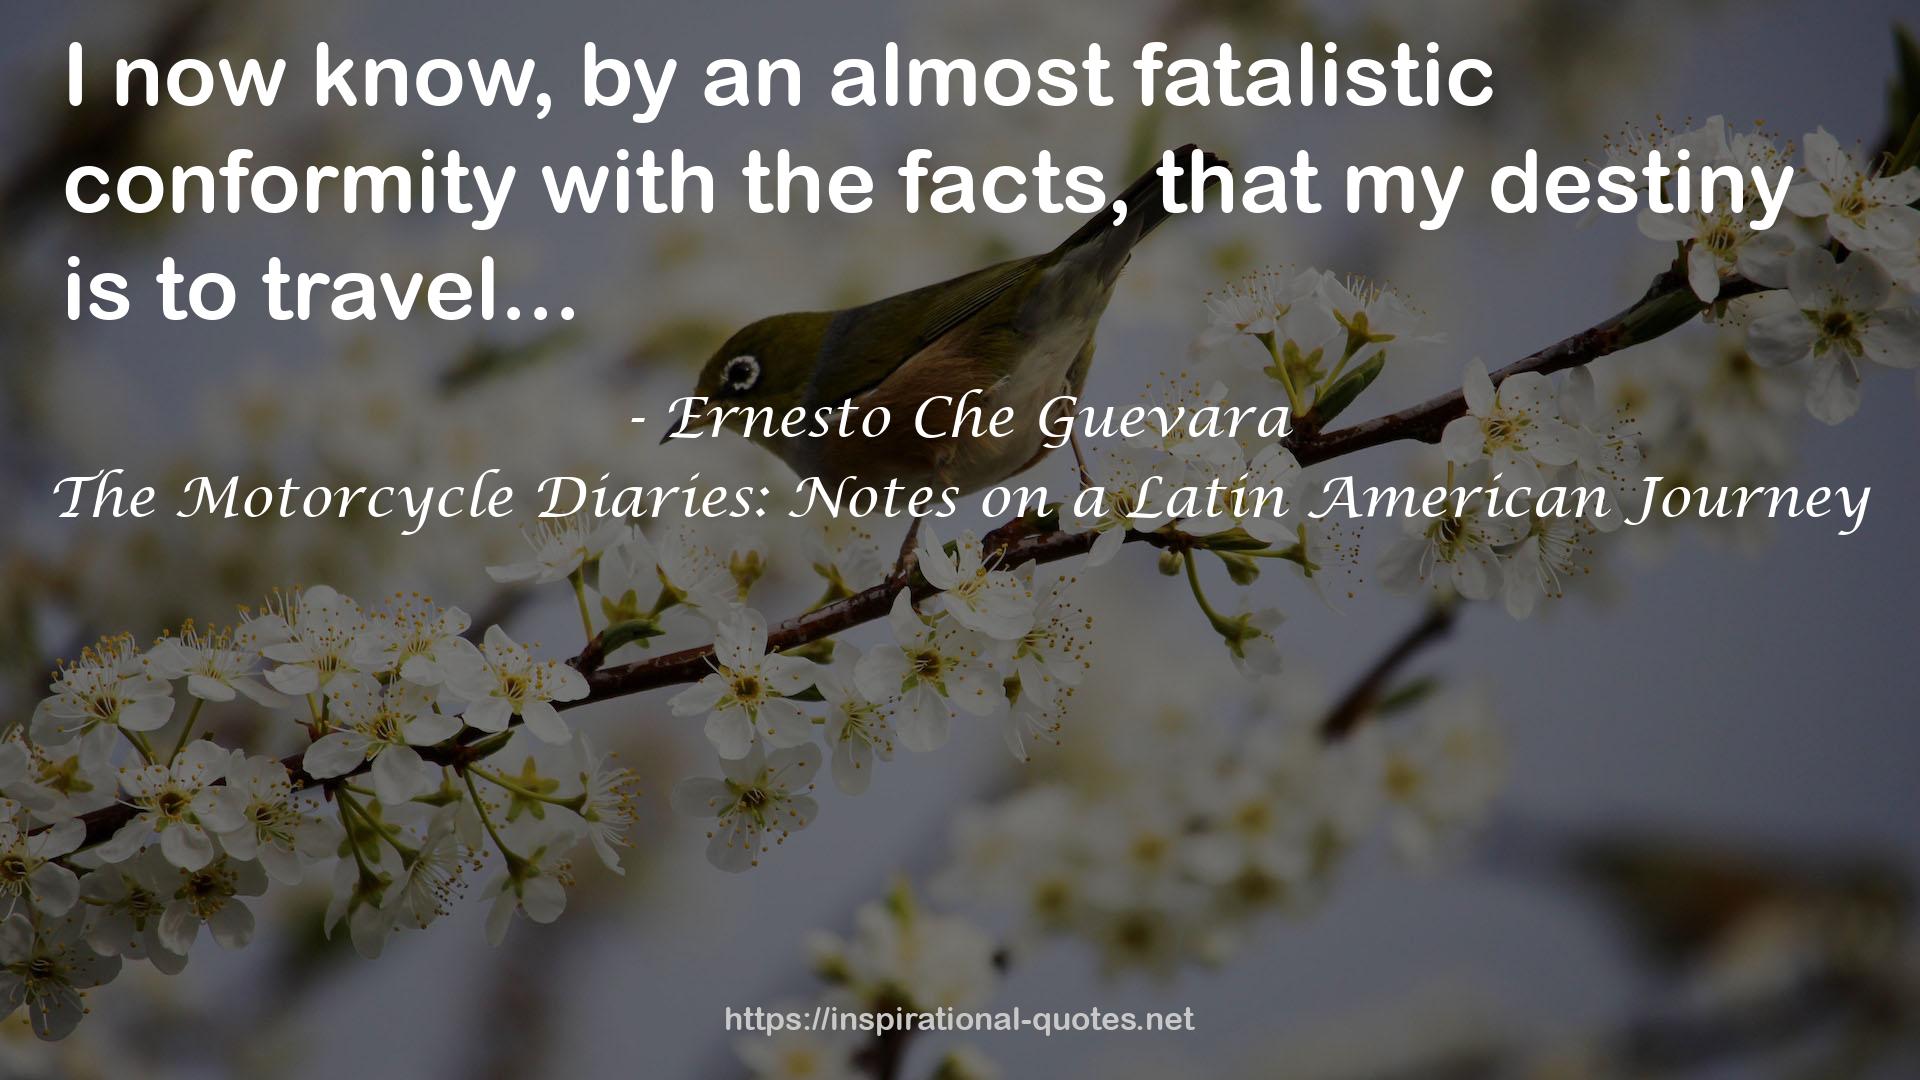 The Motorcycle Diaries: Notes on a Latin American Journey QUOTES